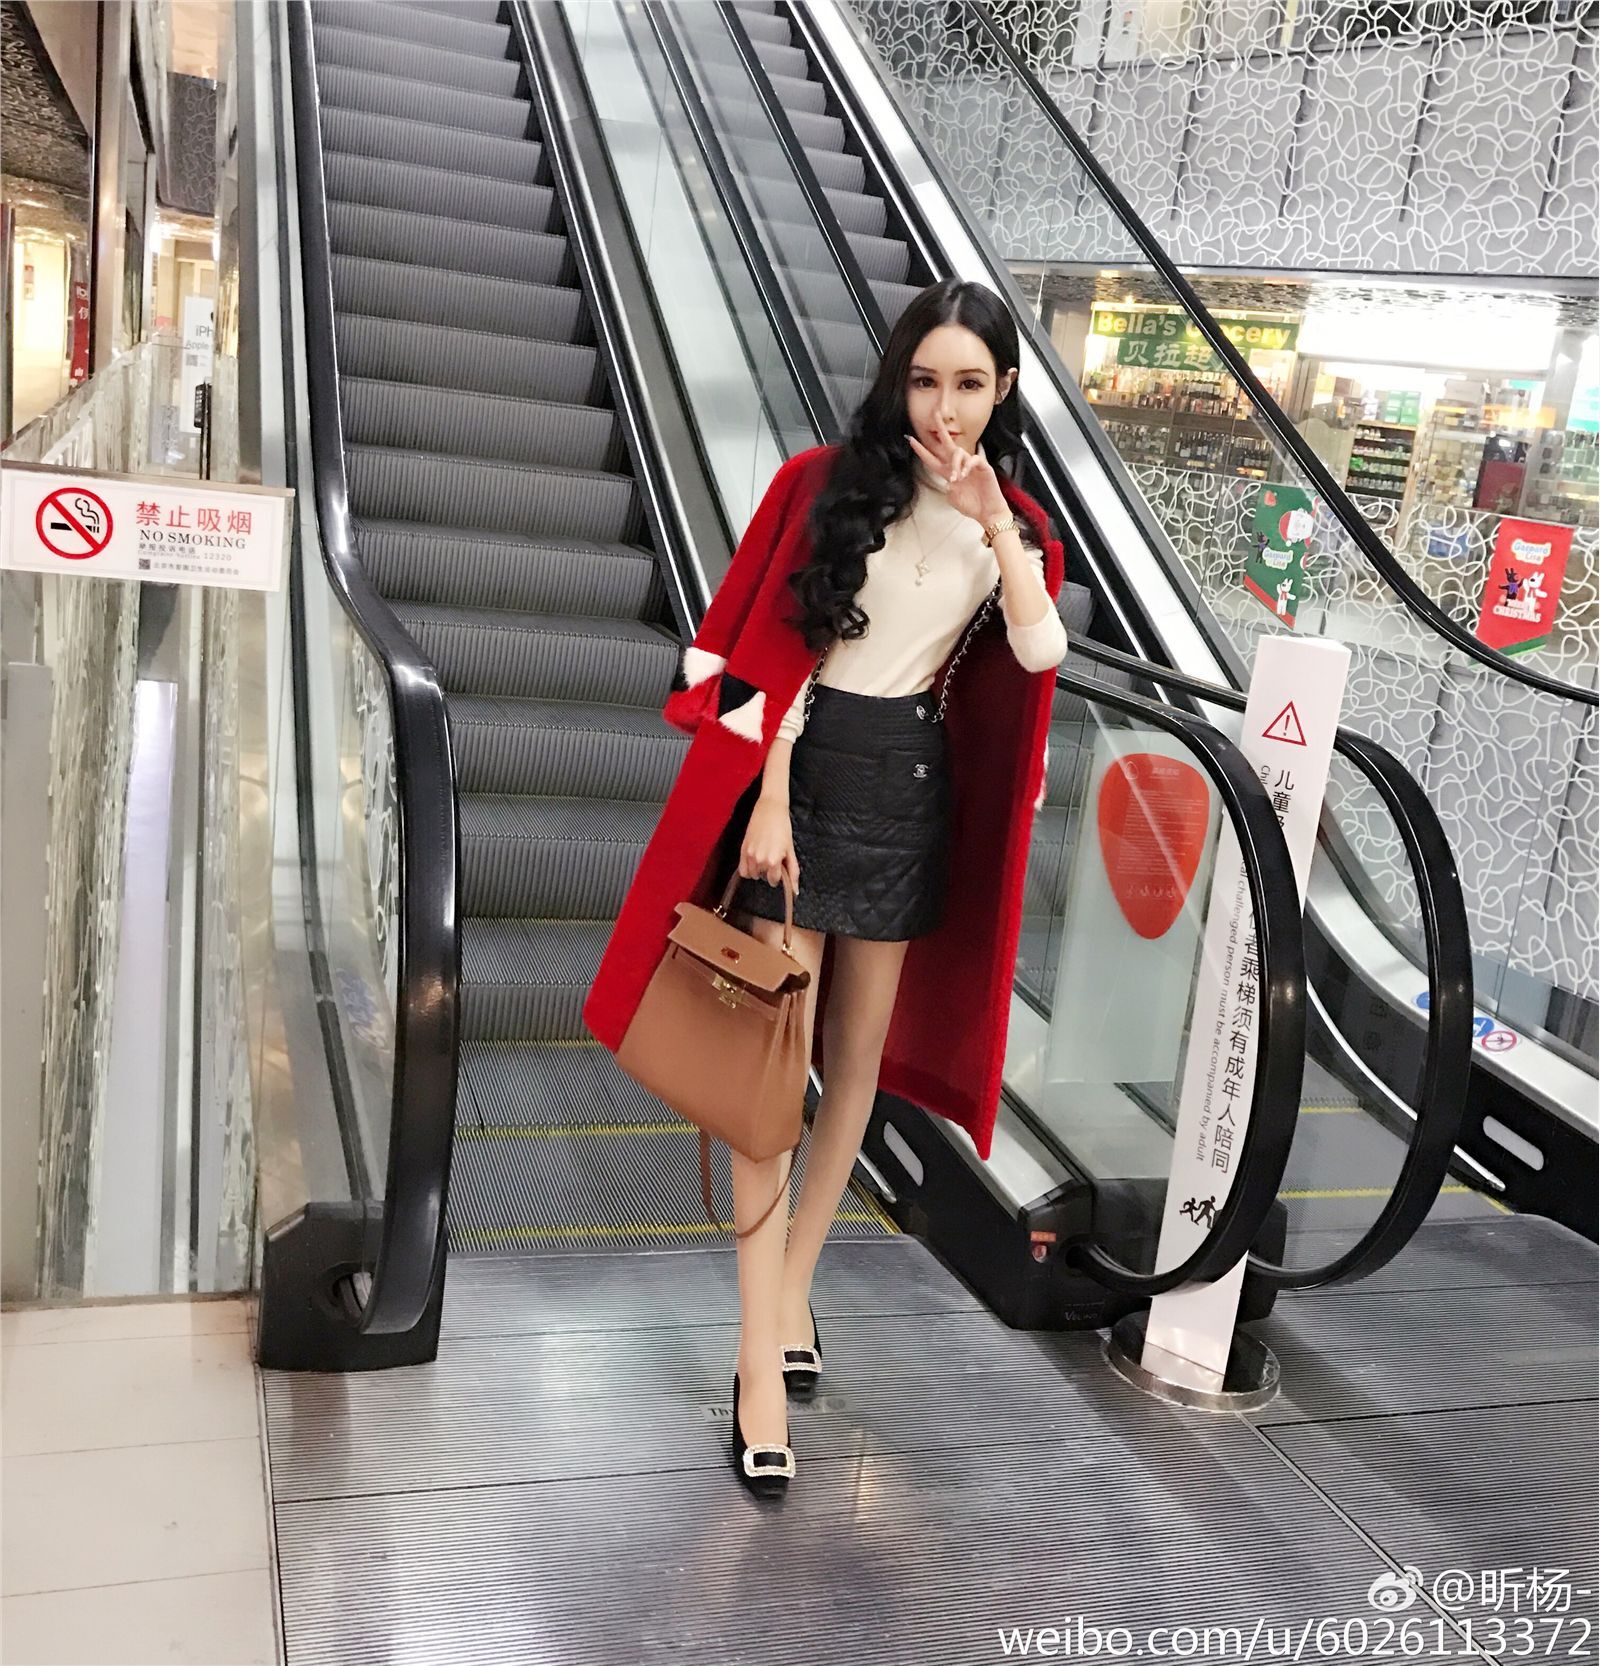 The latest album of popular model Xinyang kitty on Weibo